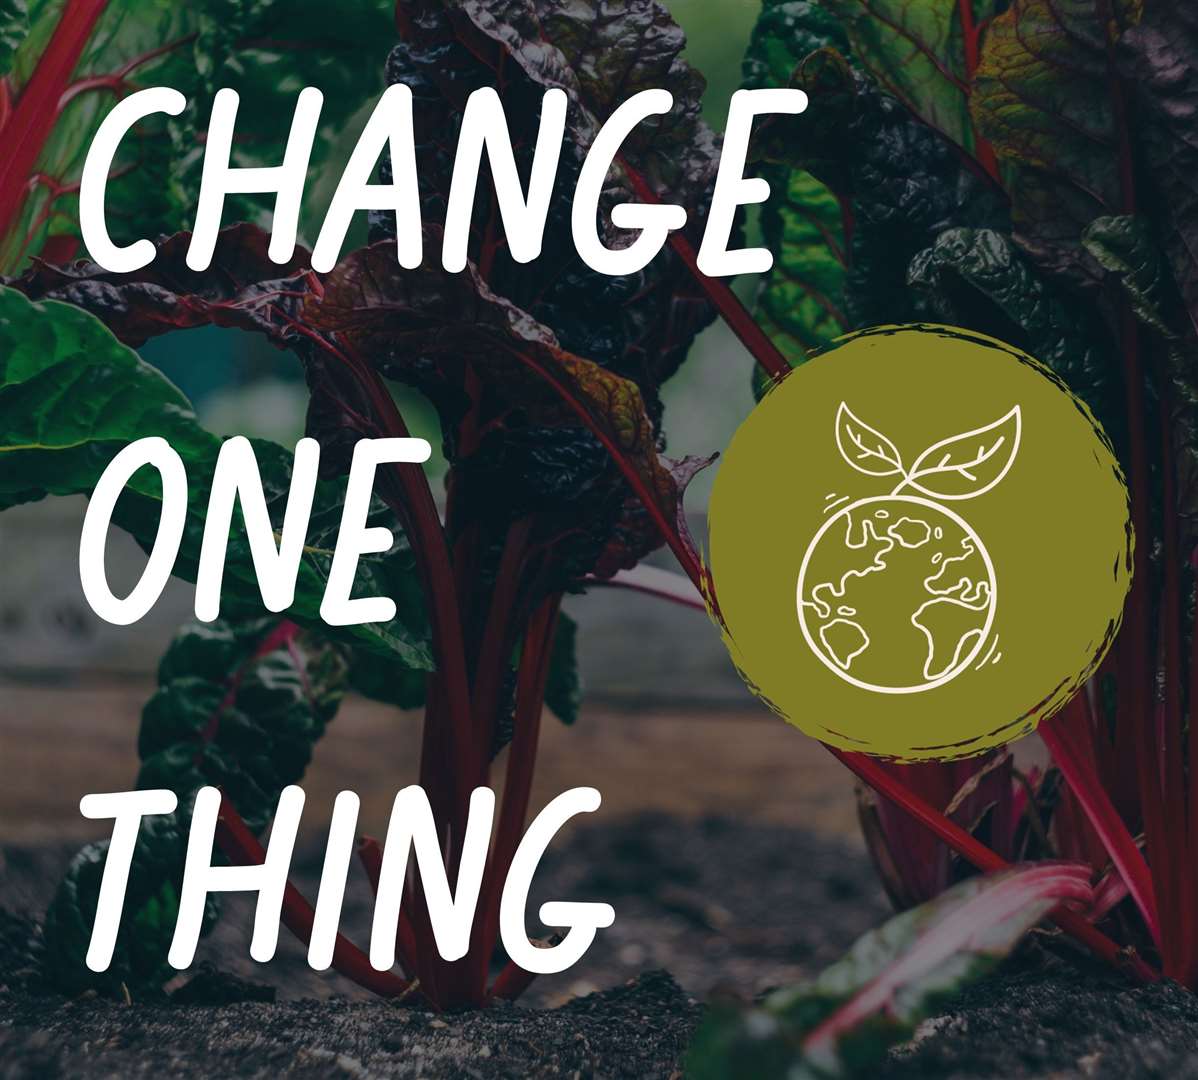 Produced in Kent's Change One Thing campaign